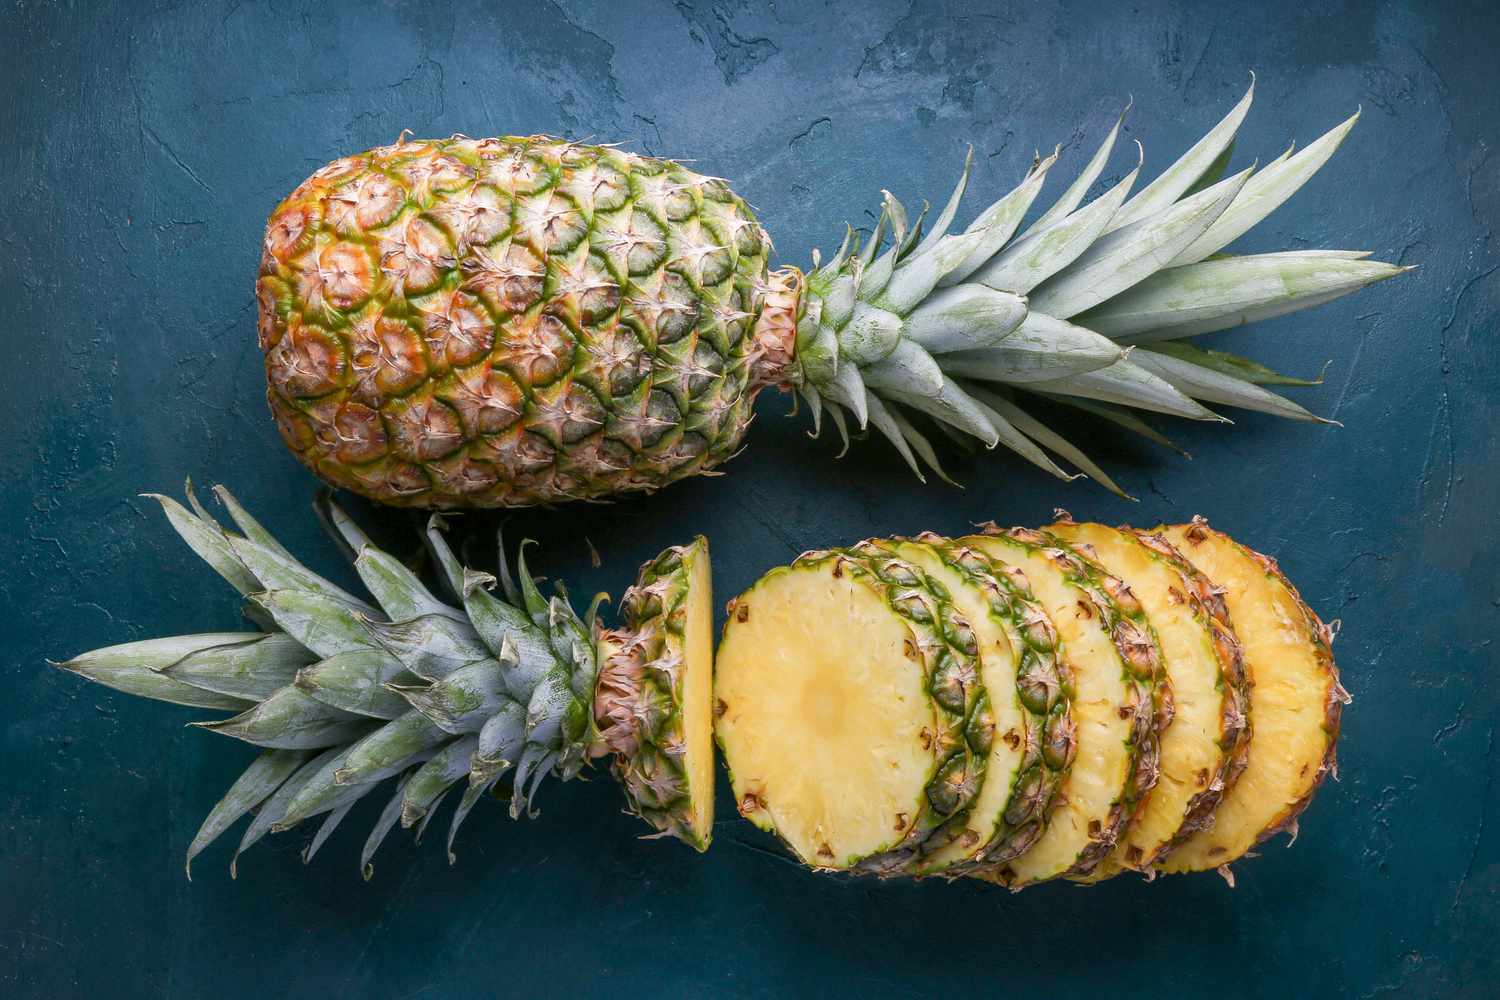 What Are the Health Benefits of Pineapple?